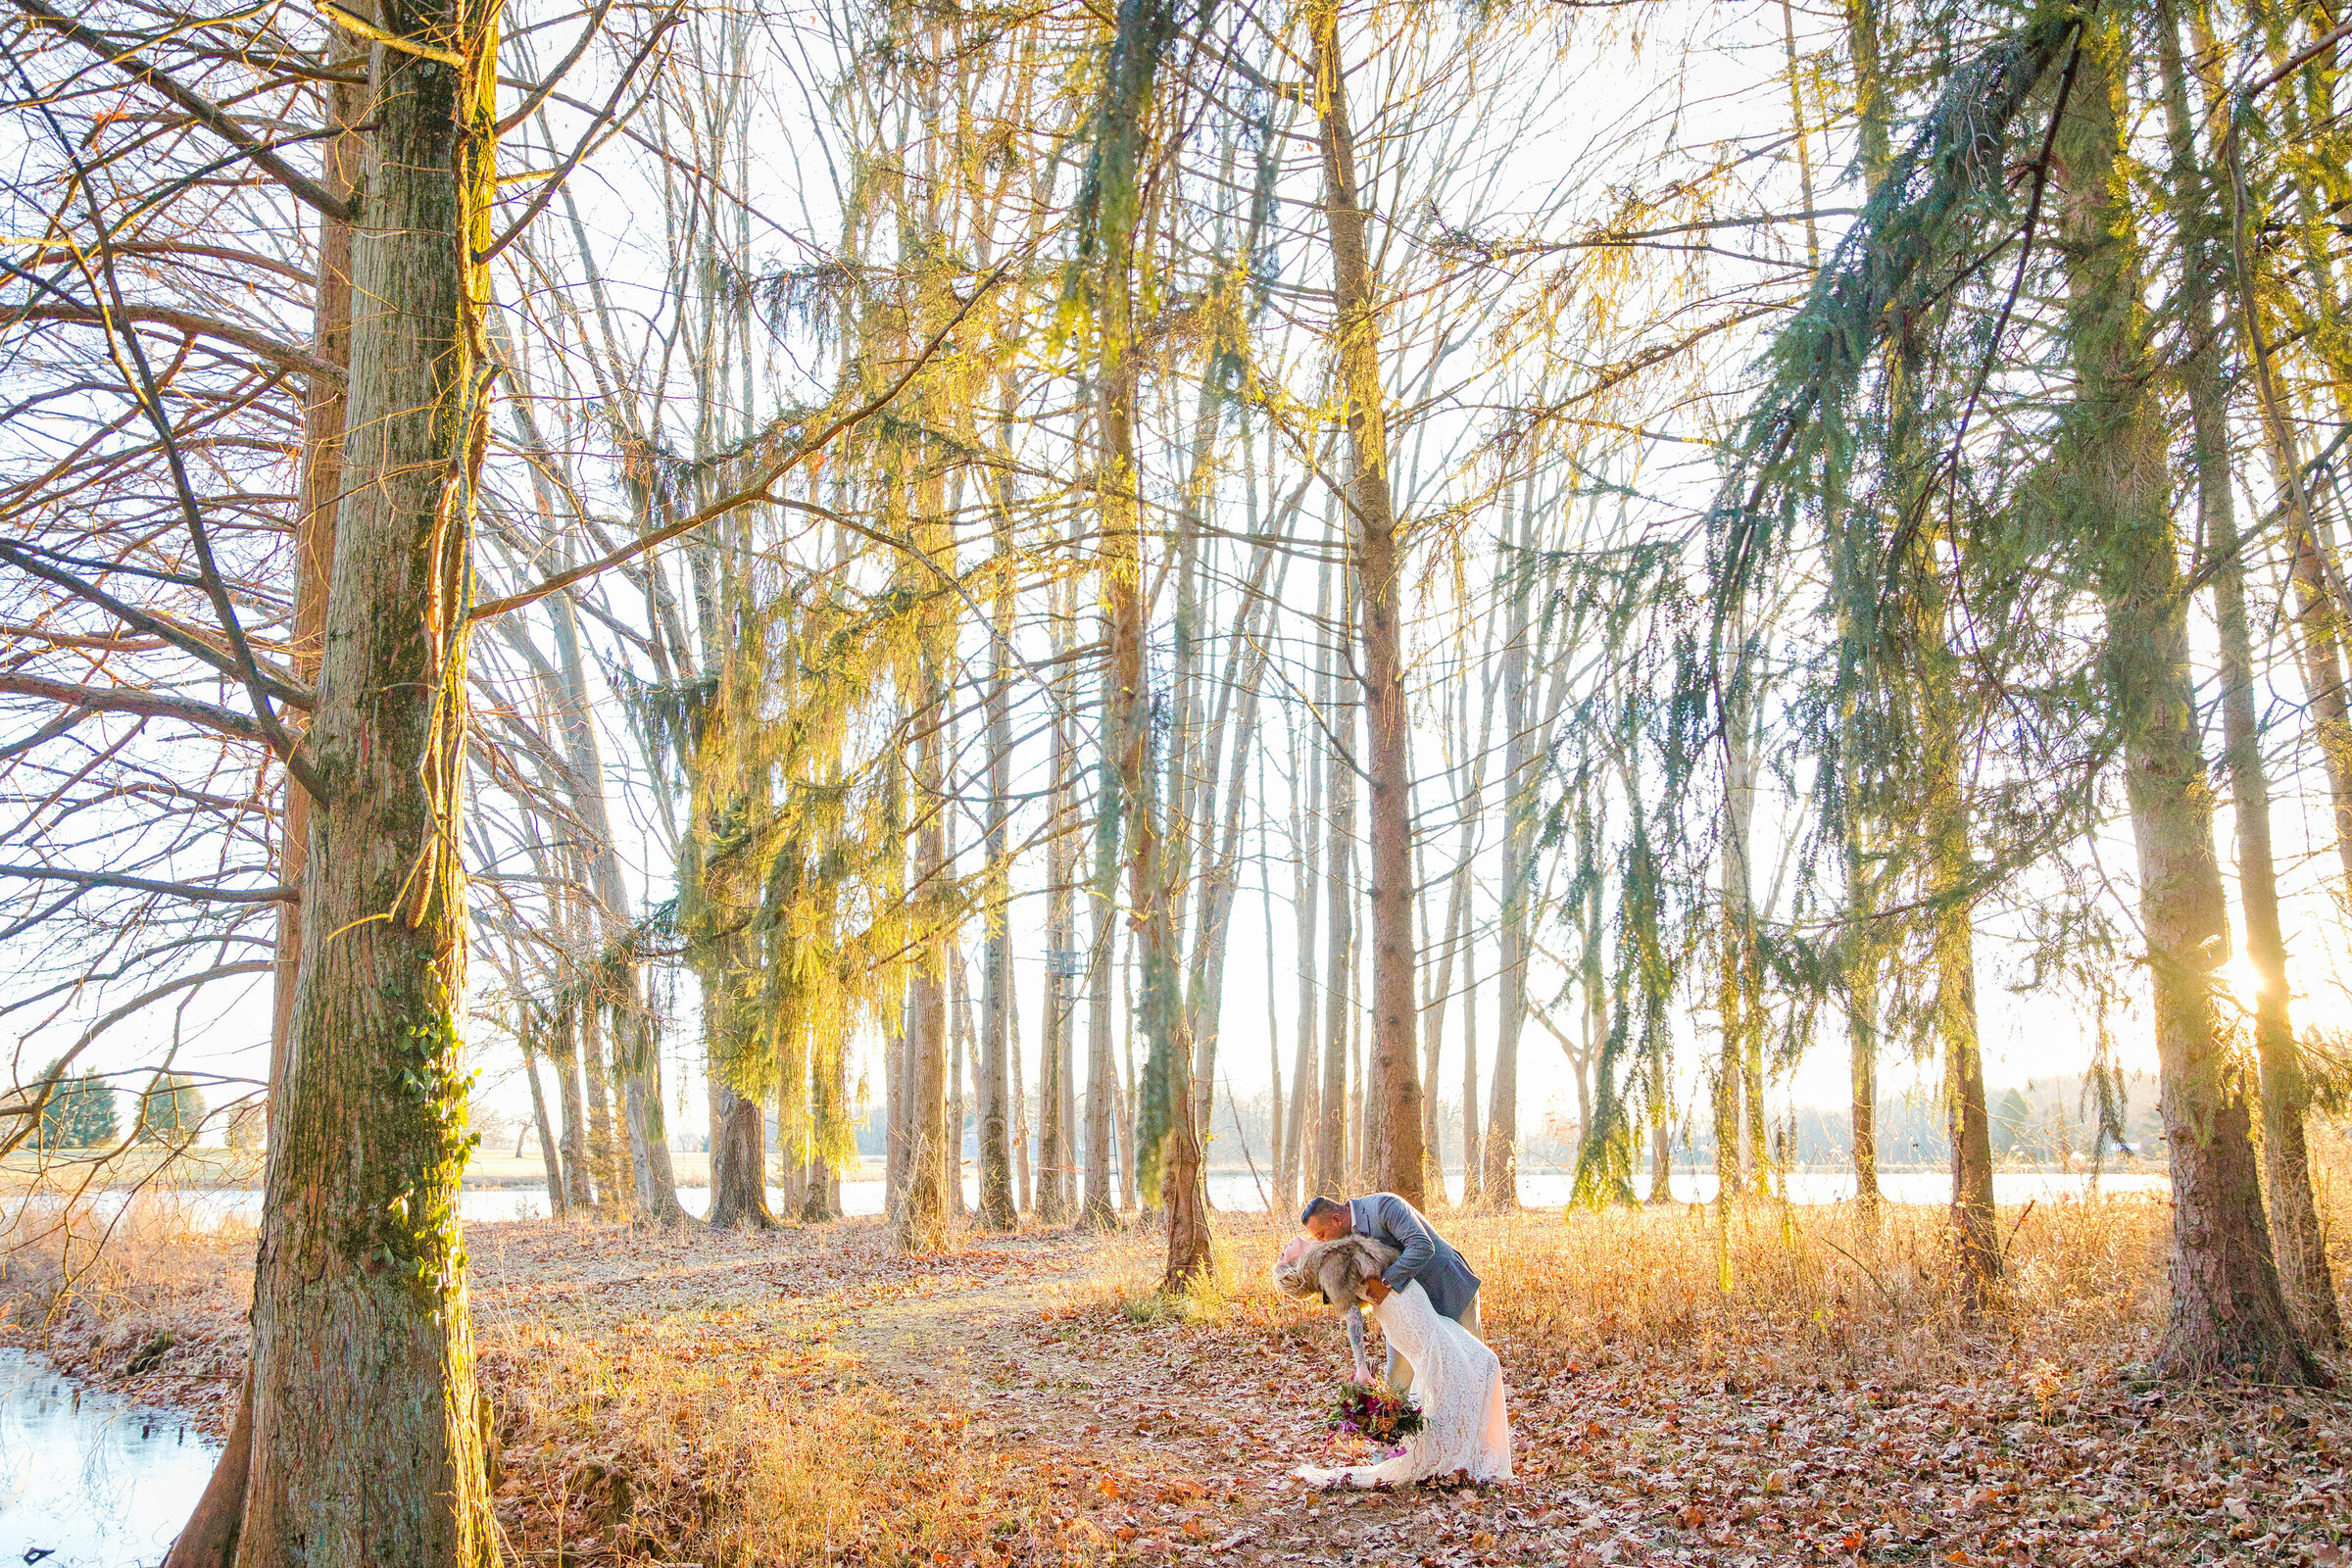 A bride and groom hold each other in the woods as the sun glows through the trees. He's wearing a grey suit and she's wearing a brown fur coat.